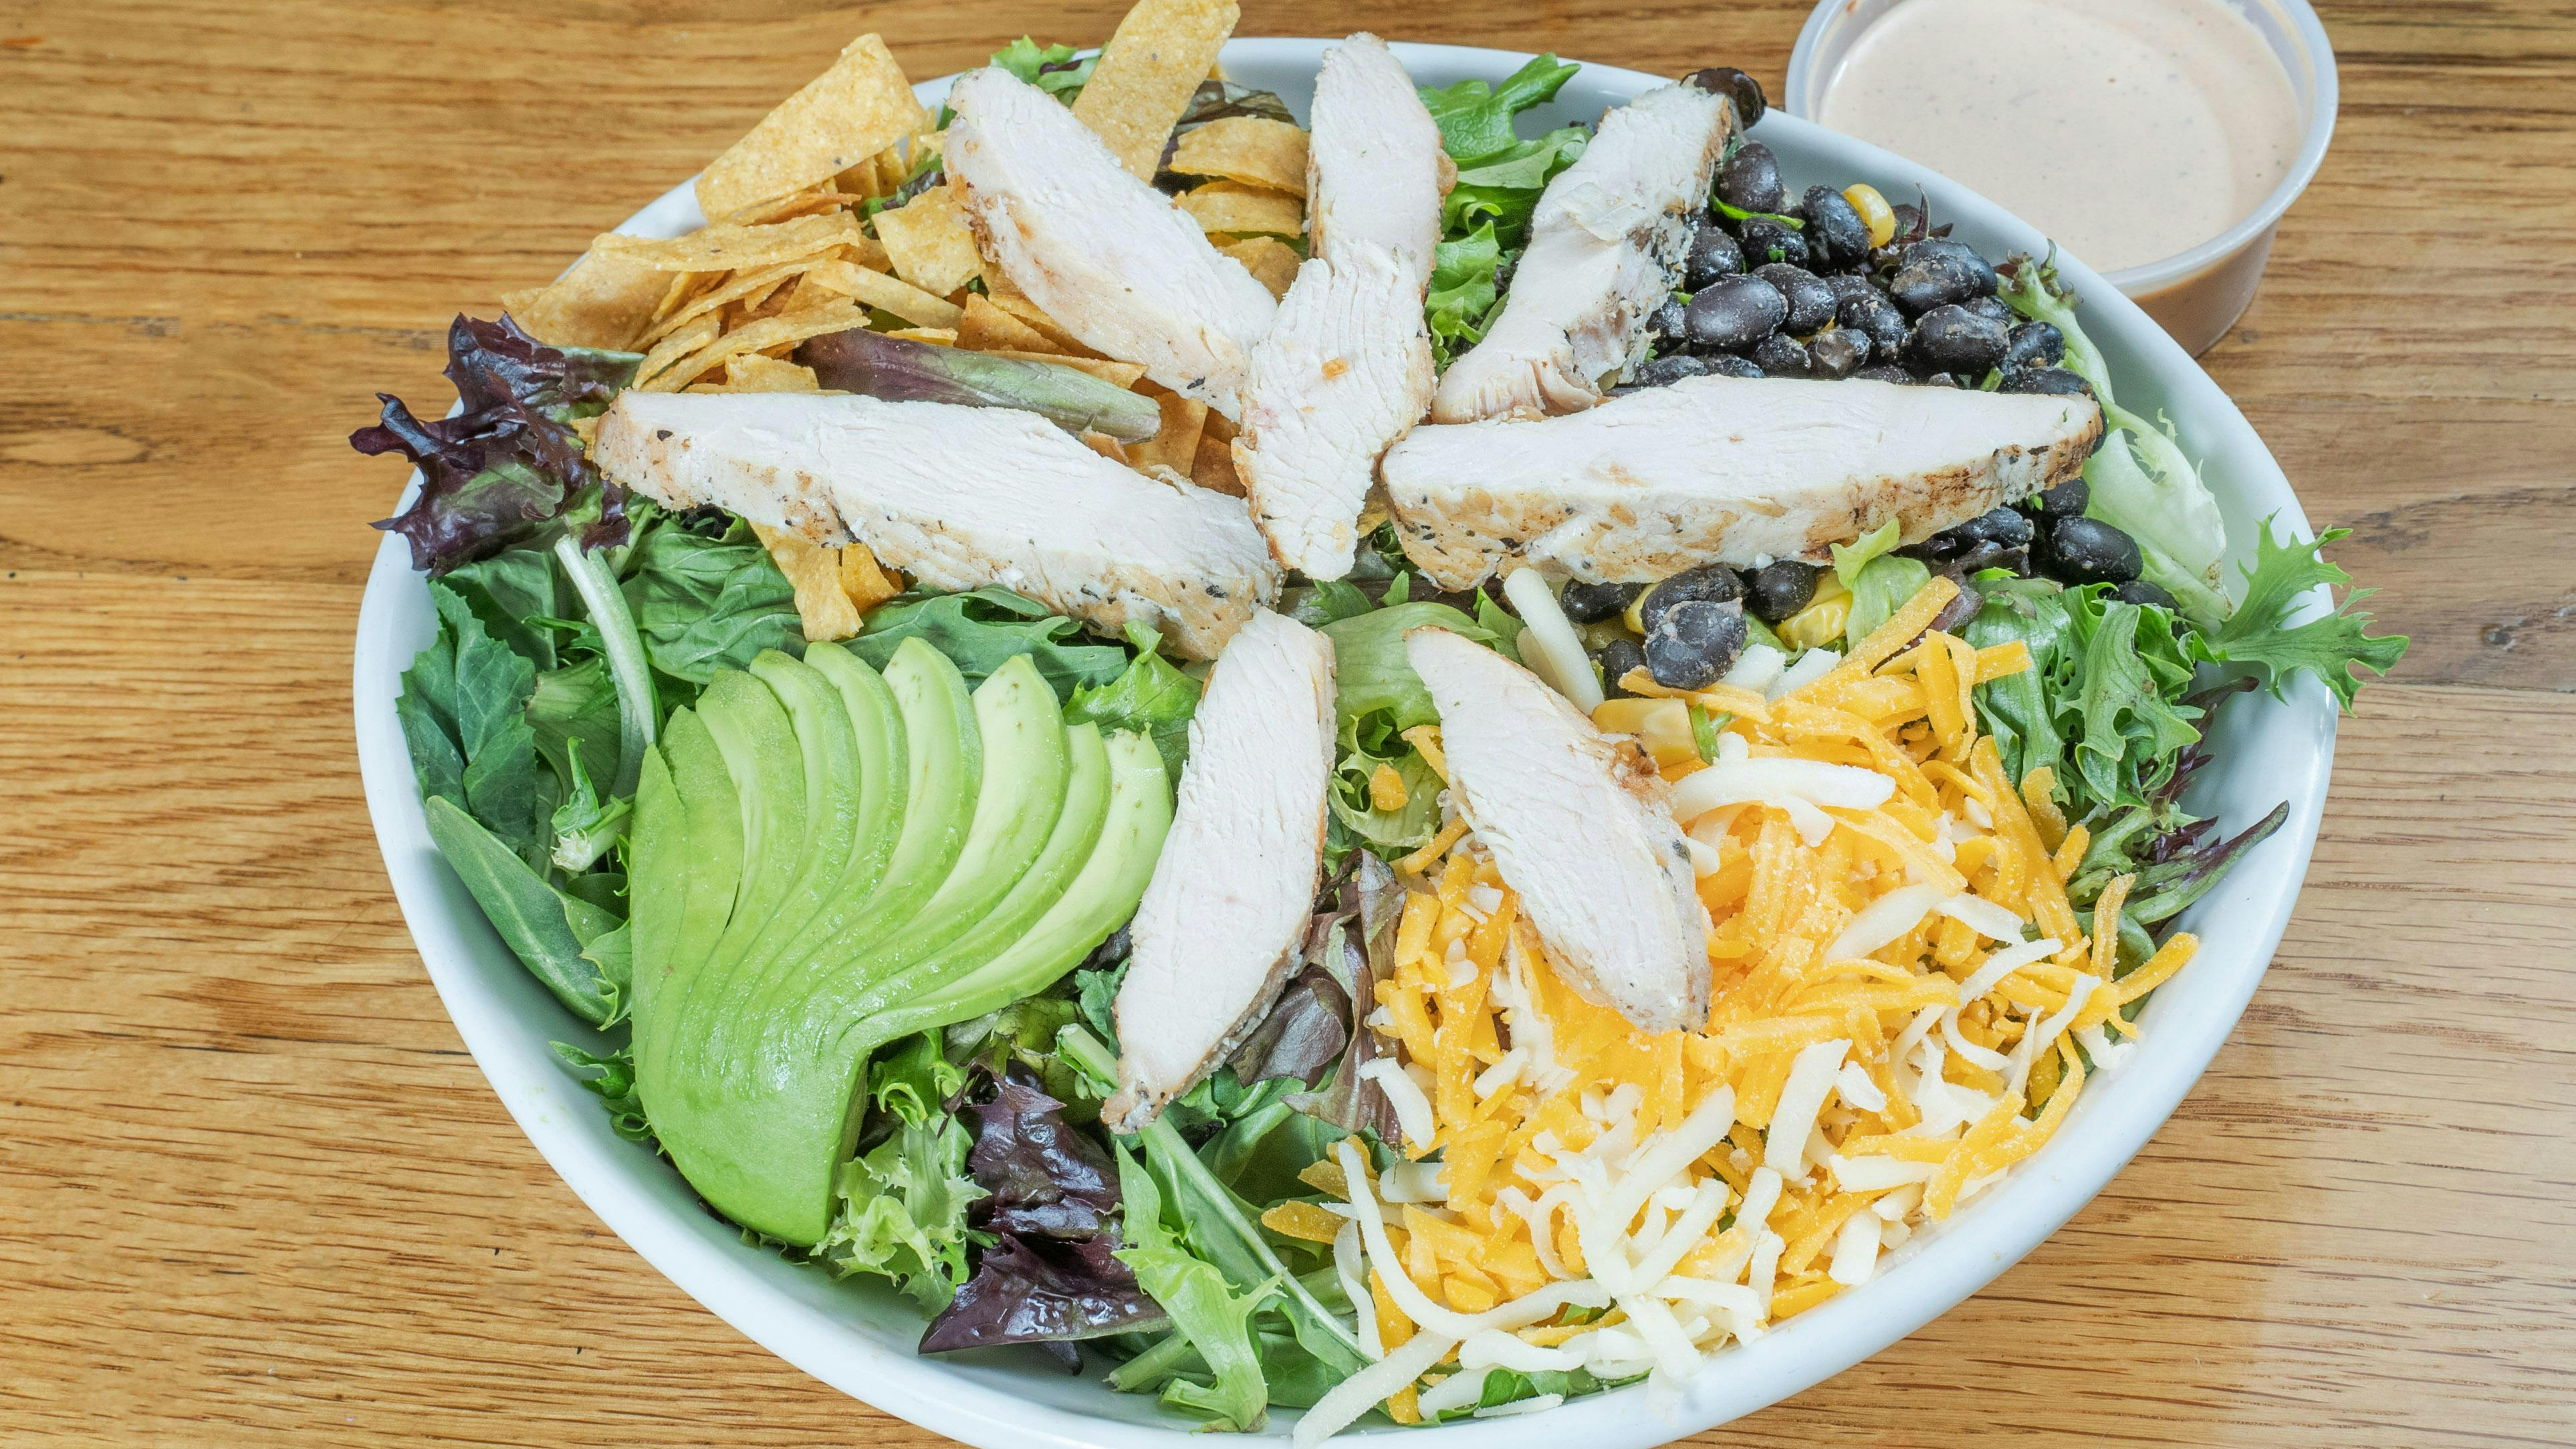 ATX Salad with Chicken from Happy Chicks - Burnet Rd in Austin, TX